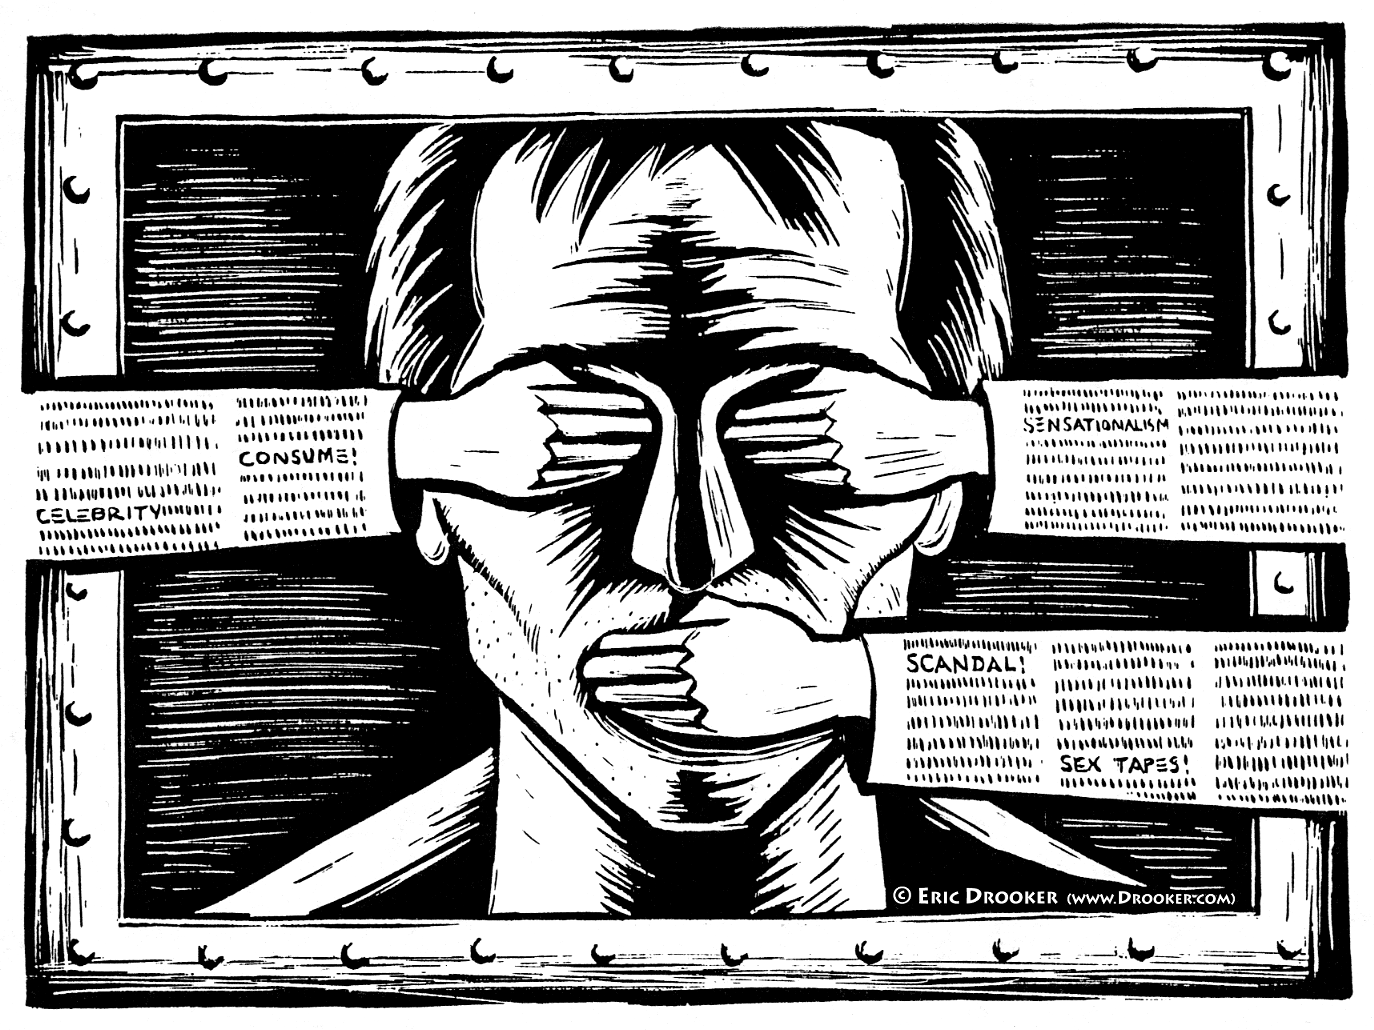 Censorship of the Arts and Media